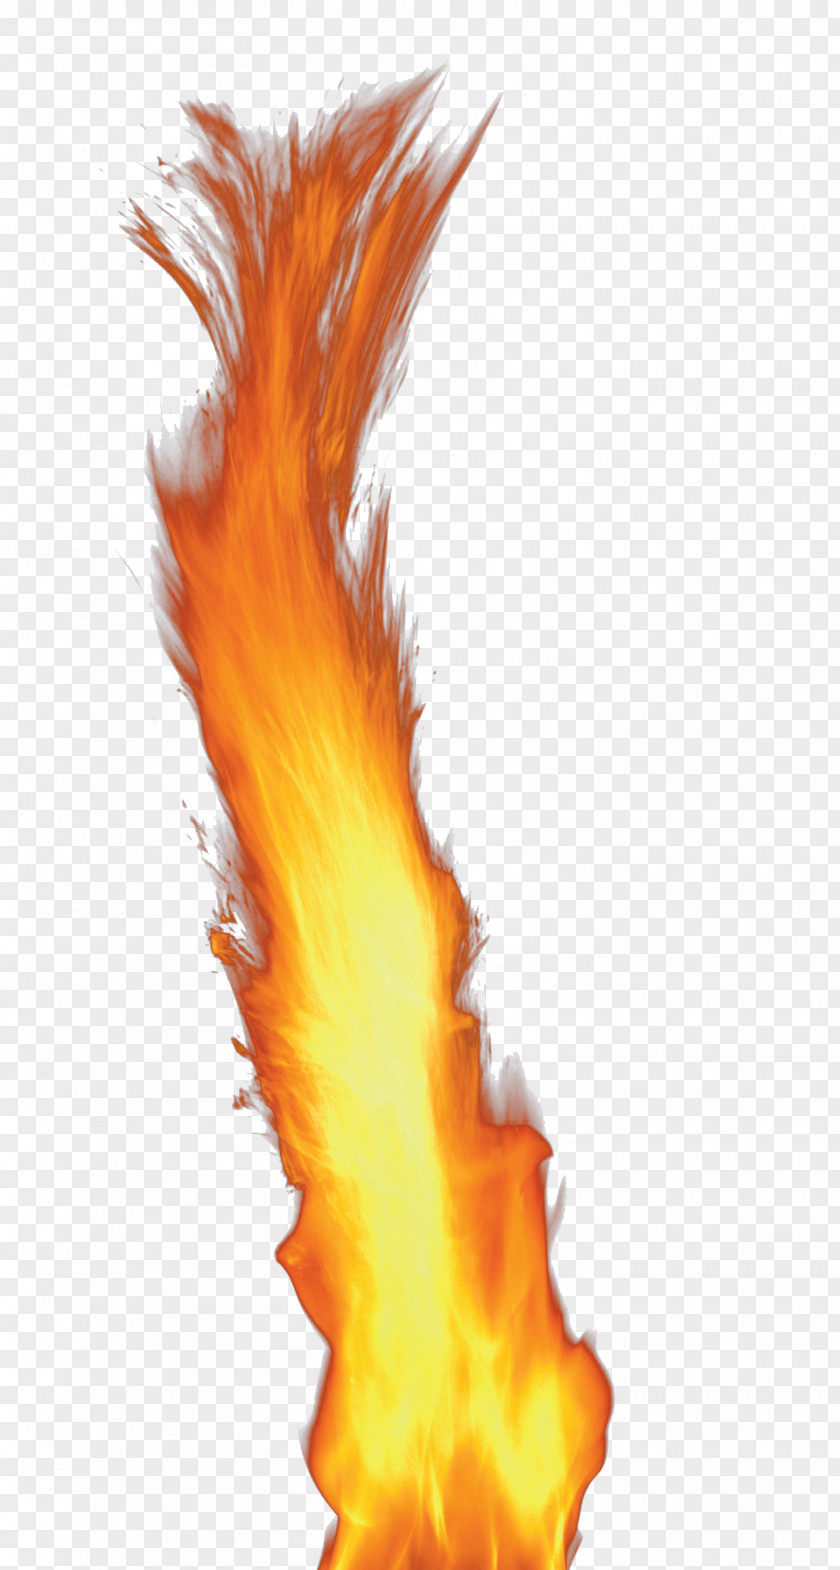 Flame PNG clipart PNG